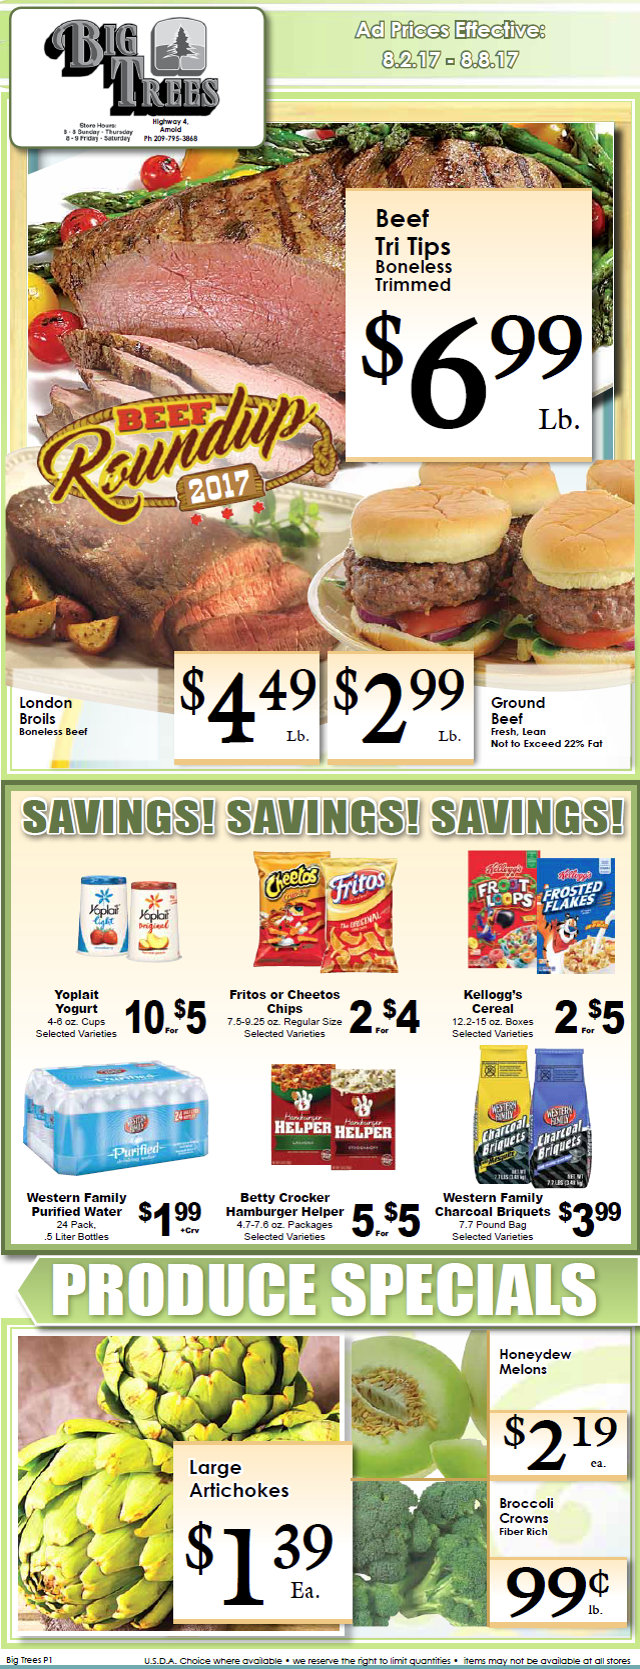 Big Trees Market Weekly Ad & Specials Through August 8th